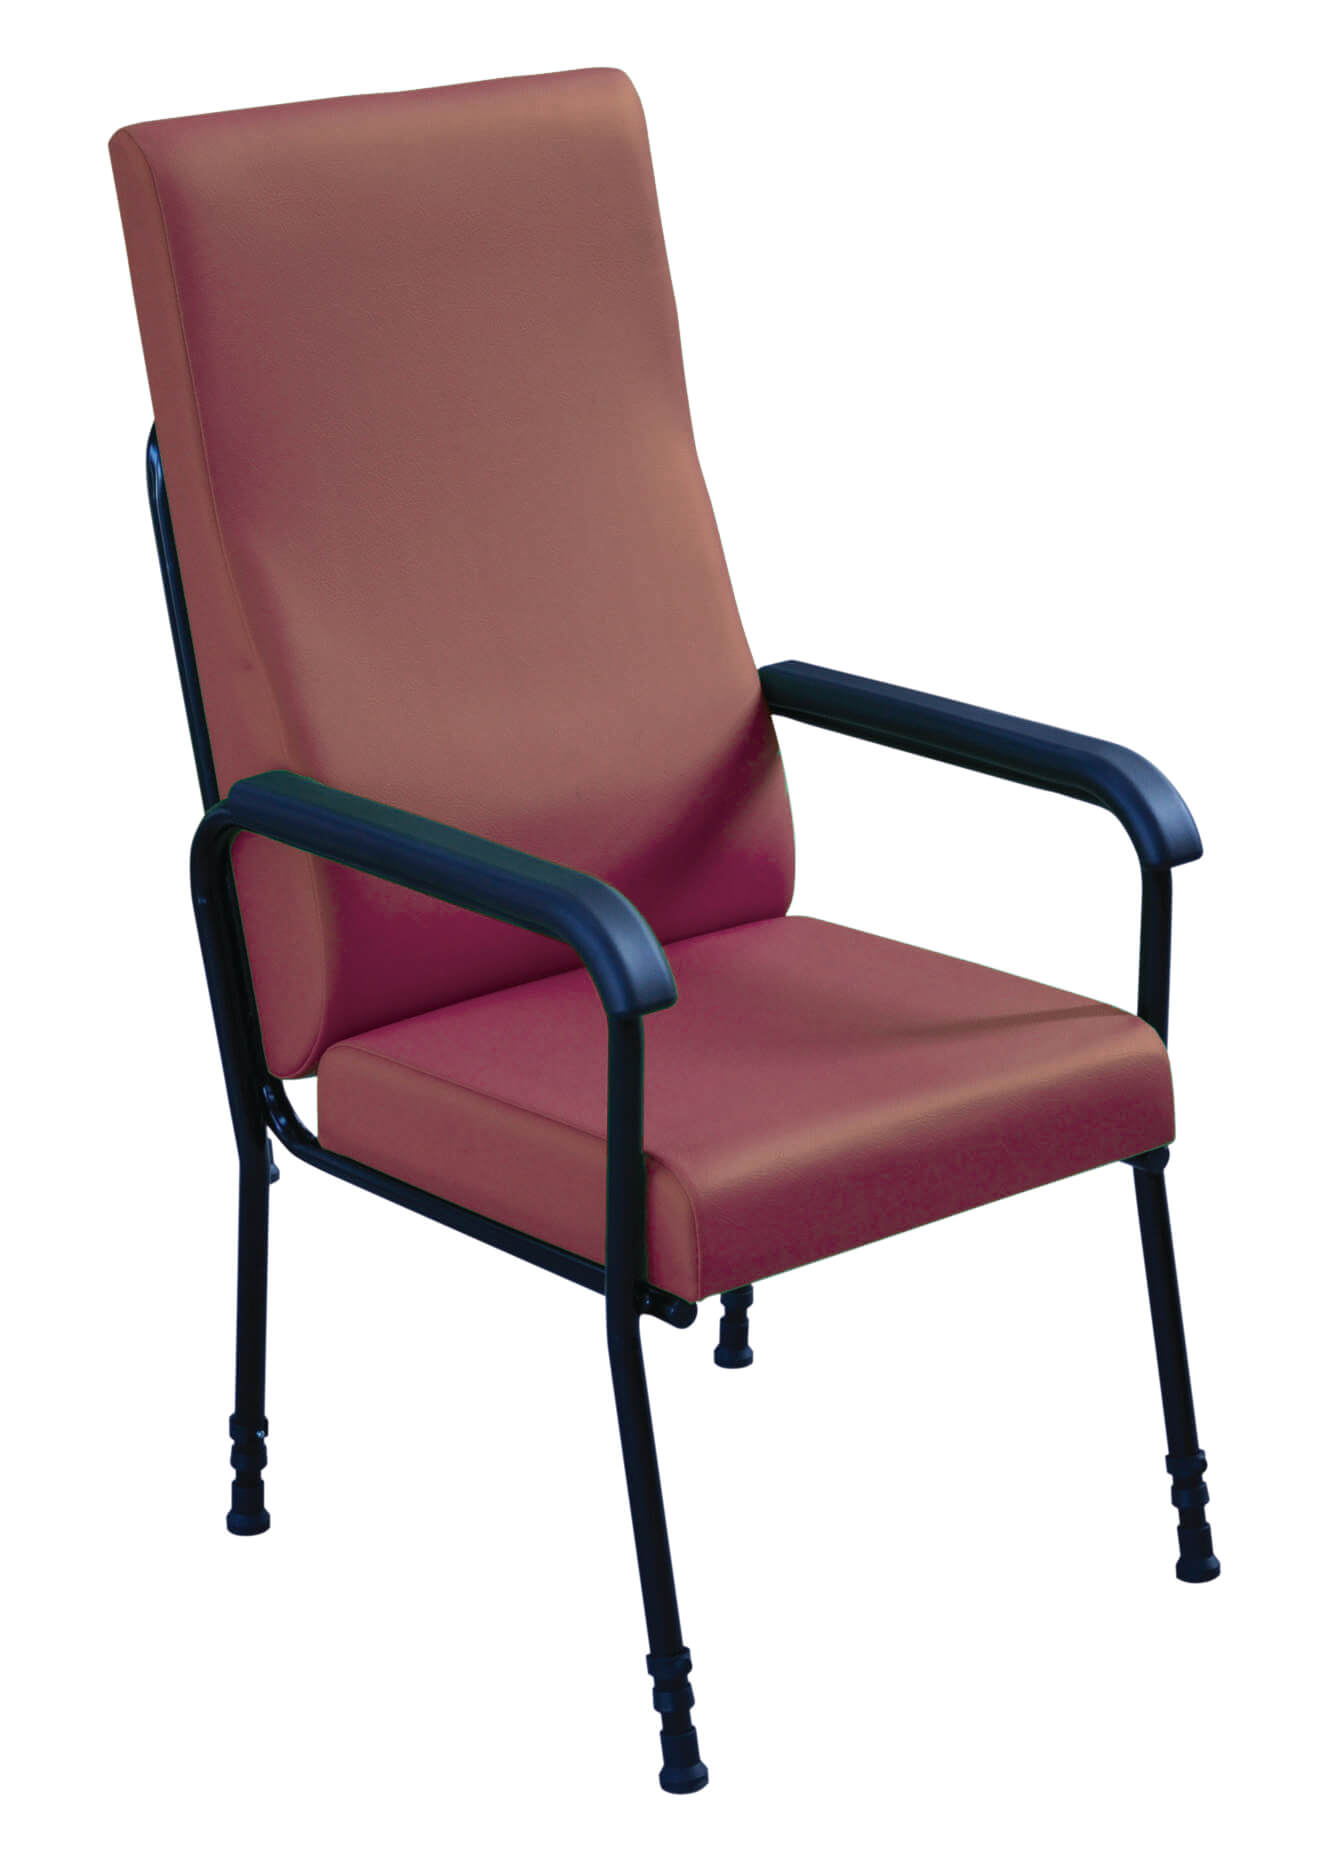 Lounge Chair | Seating & Posturing | Cavendish Health Care